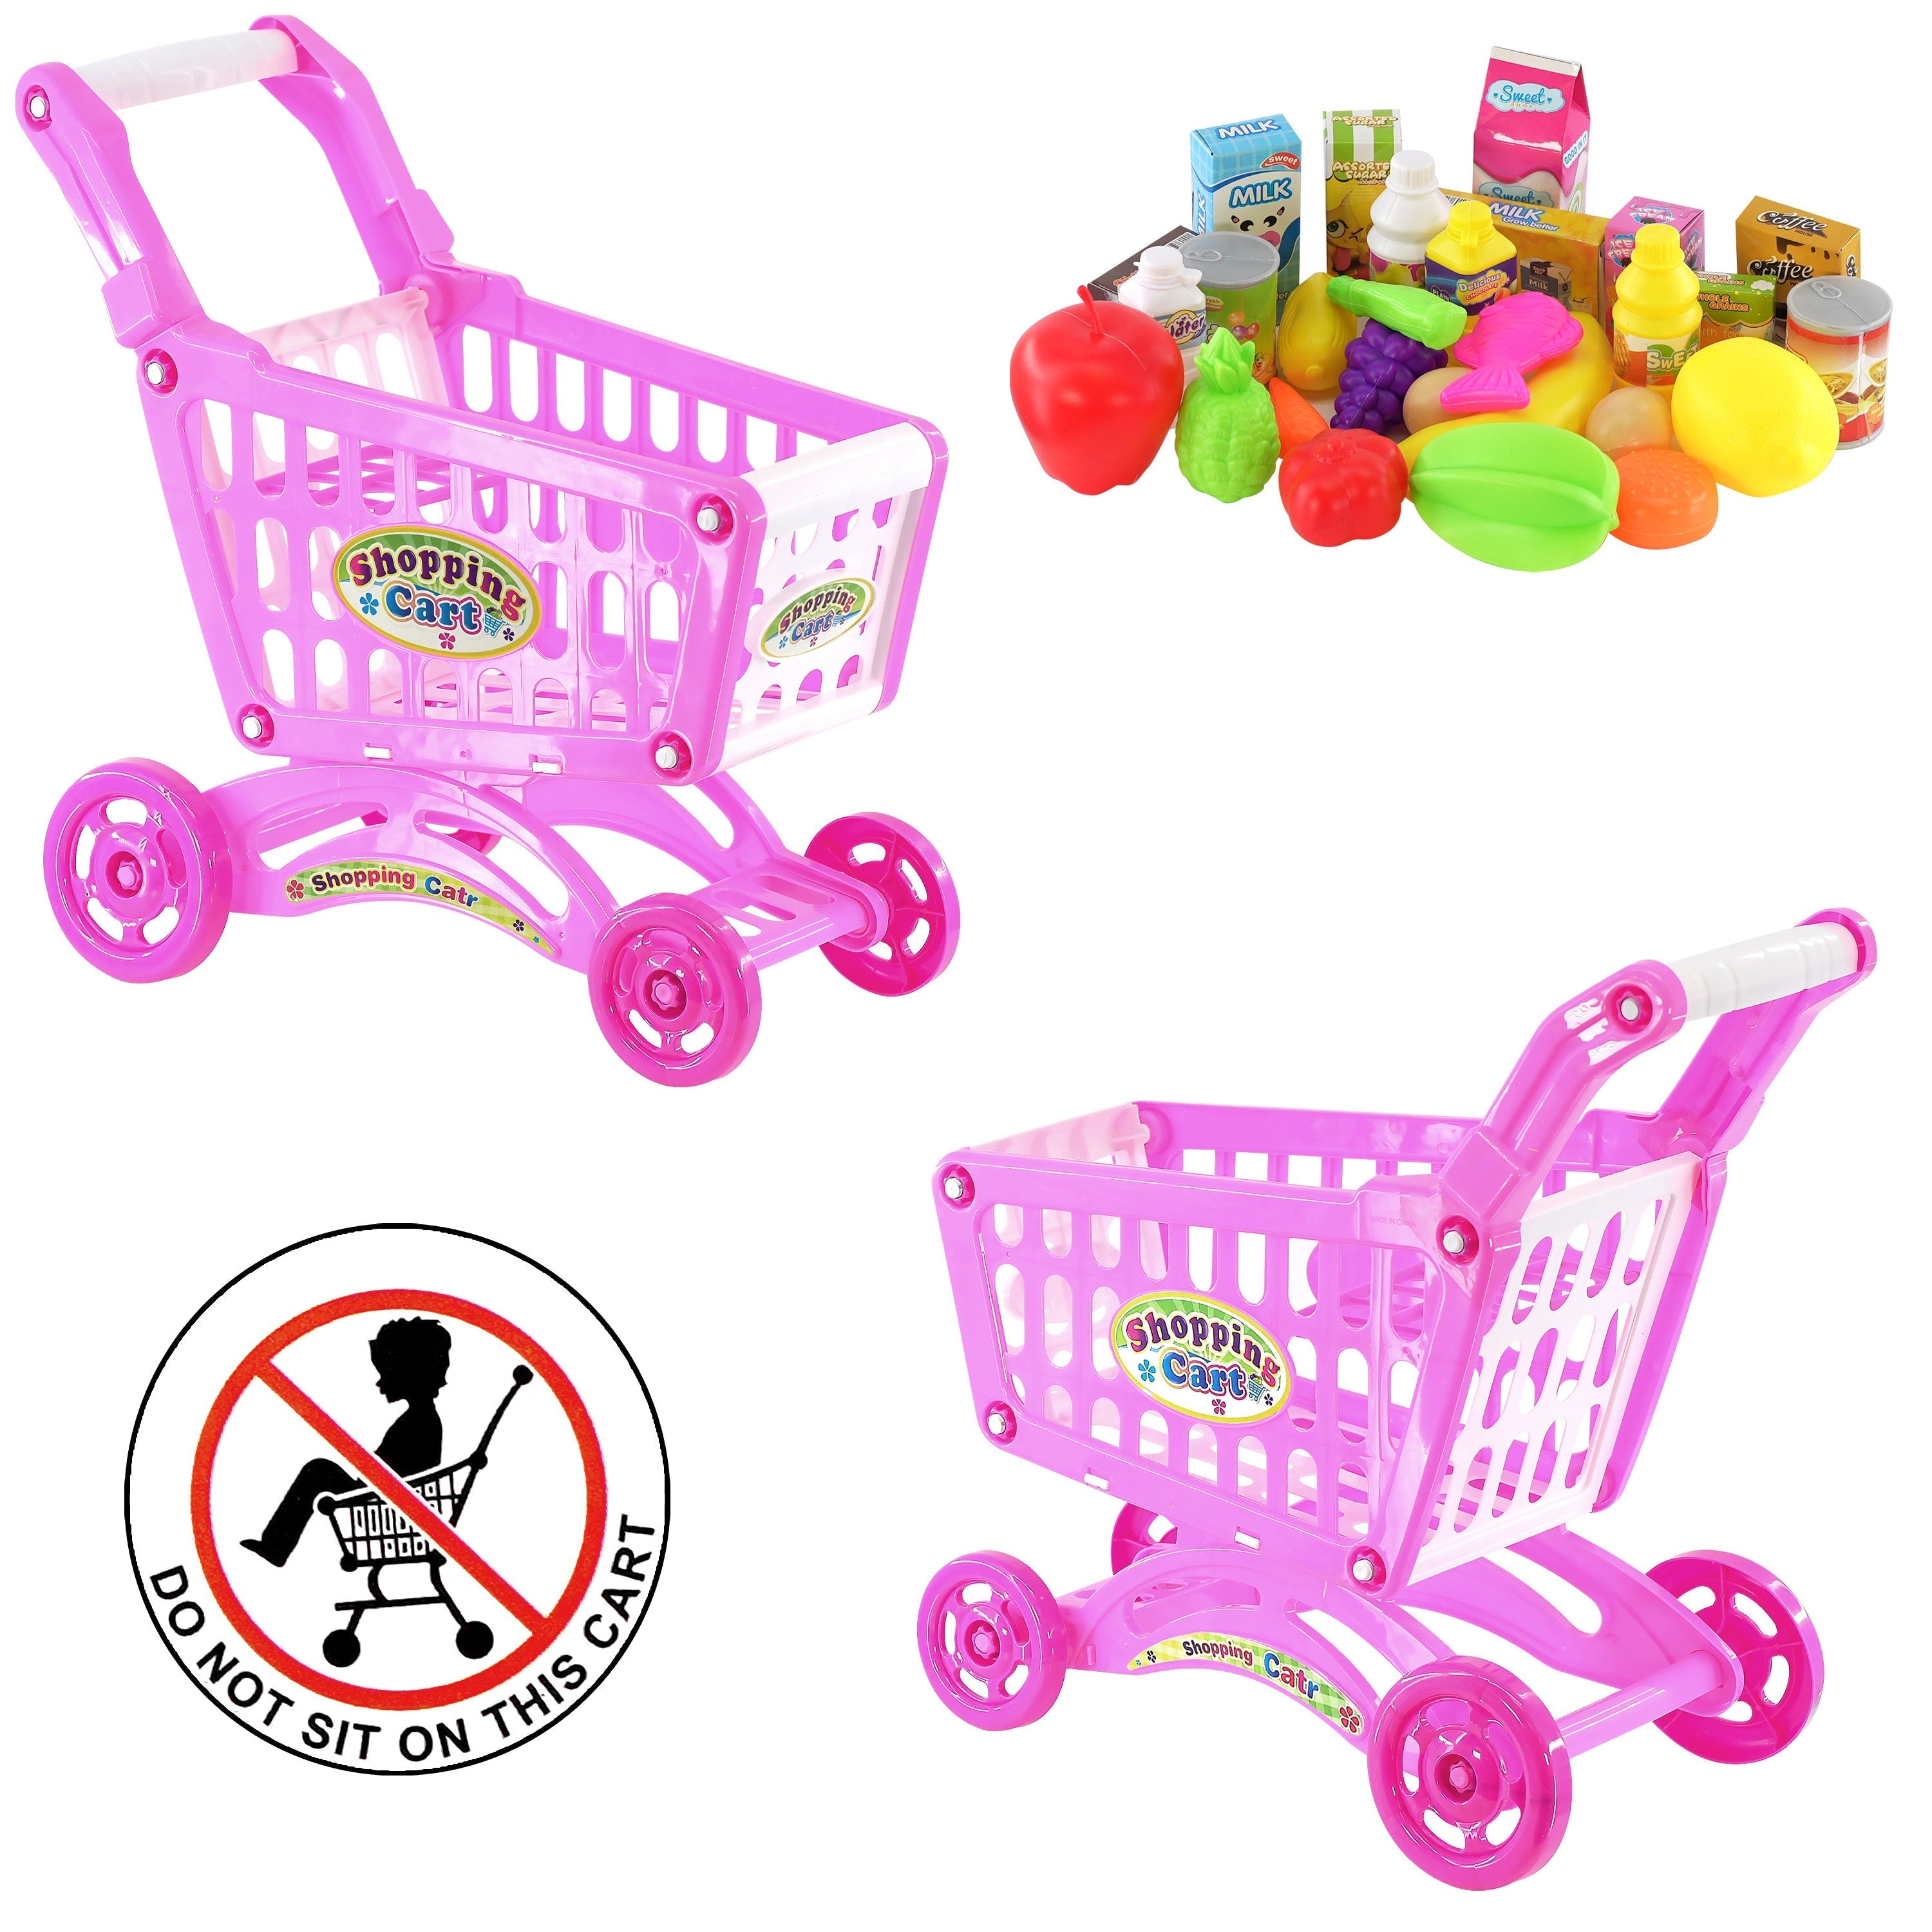 The Magic Toy Shop Playset Pink Shopping Trolley Cart Play Food Set